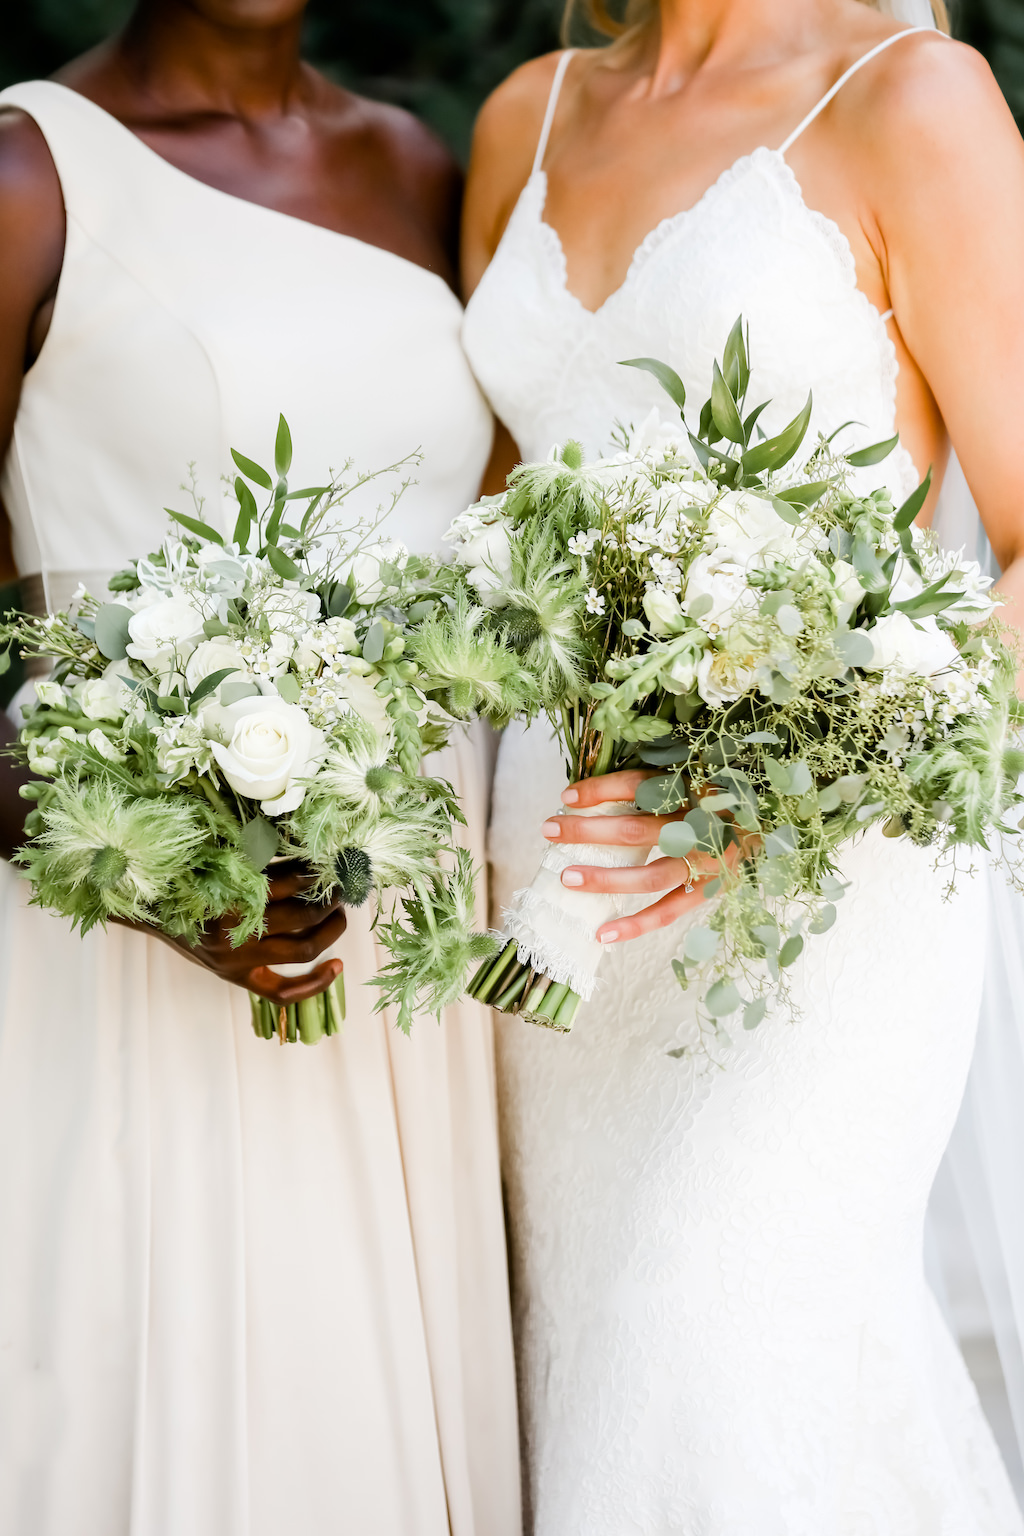 Florida Bride and Bridesmaid in Neutral One Shoulder Dress Holding Garden Inspired Greenery and White, Ivory Floral Bouquet | Tampa Bay Wedding Photographer Lifelong Photography Studio